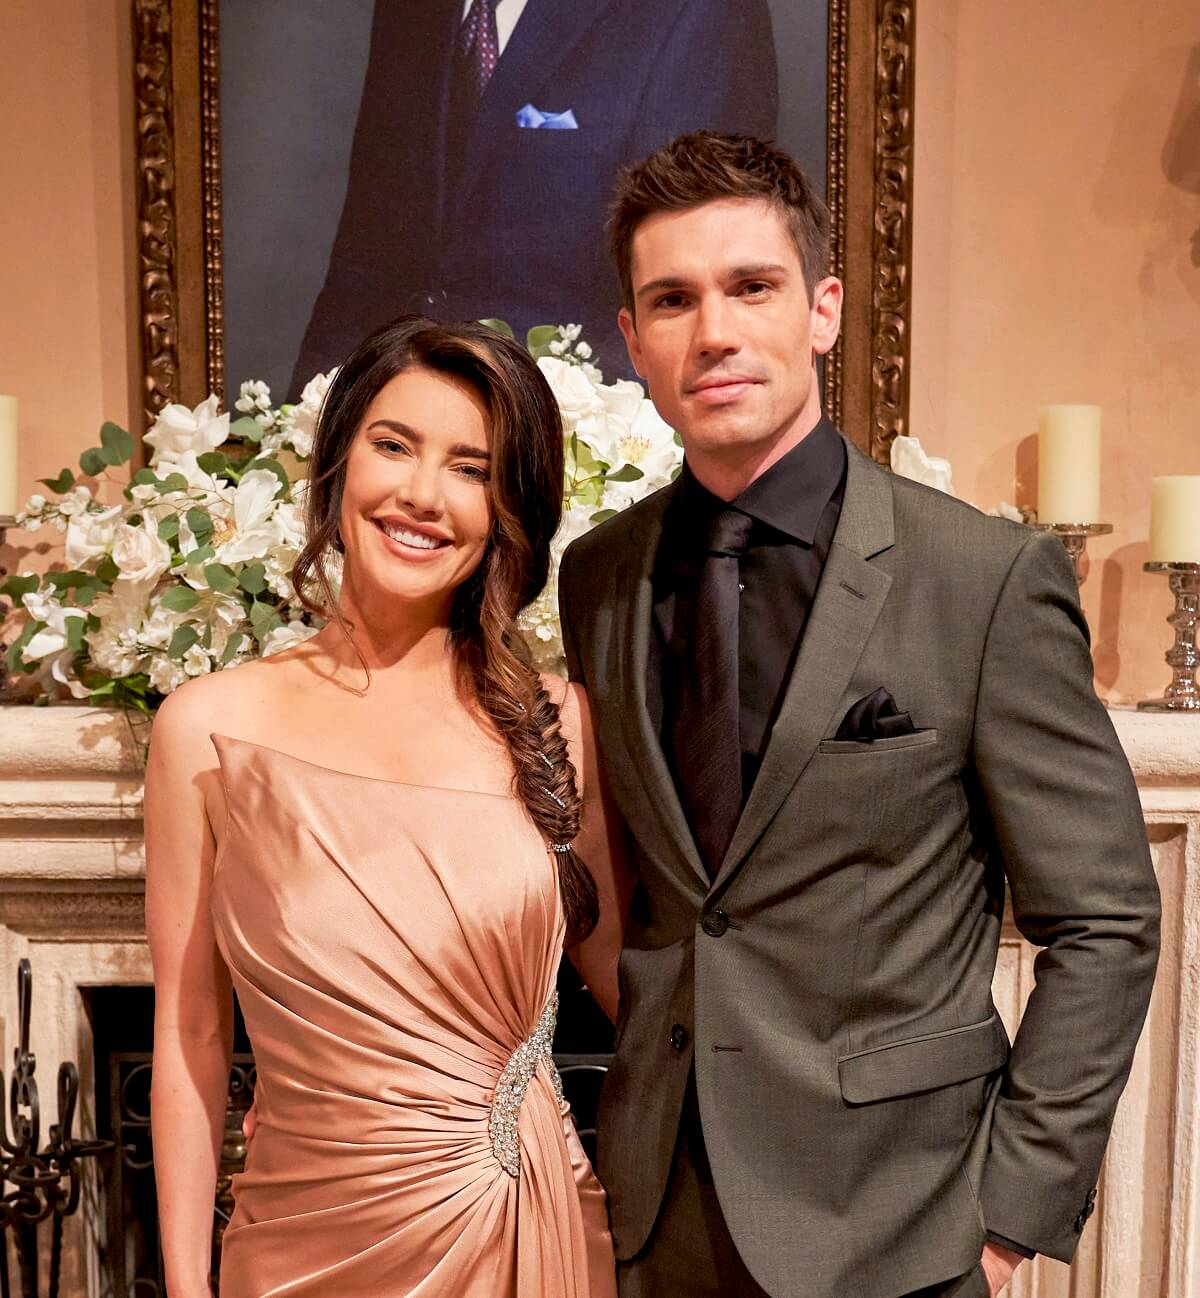 'The Bold and the Beautiful' stars Jacqueline MacInnes Wood and Tanner Novlan posing together on set of the soap opera.